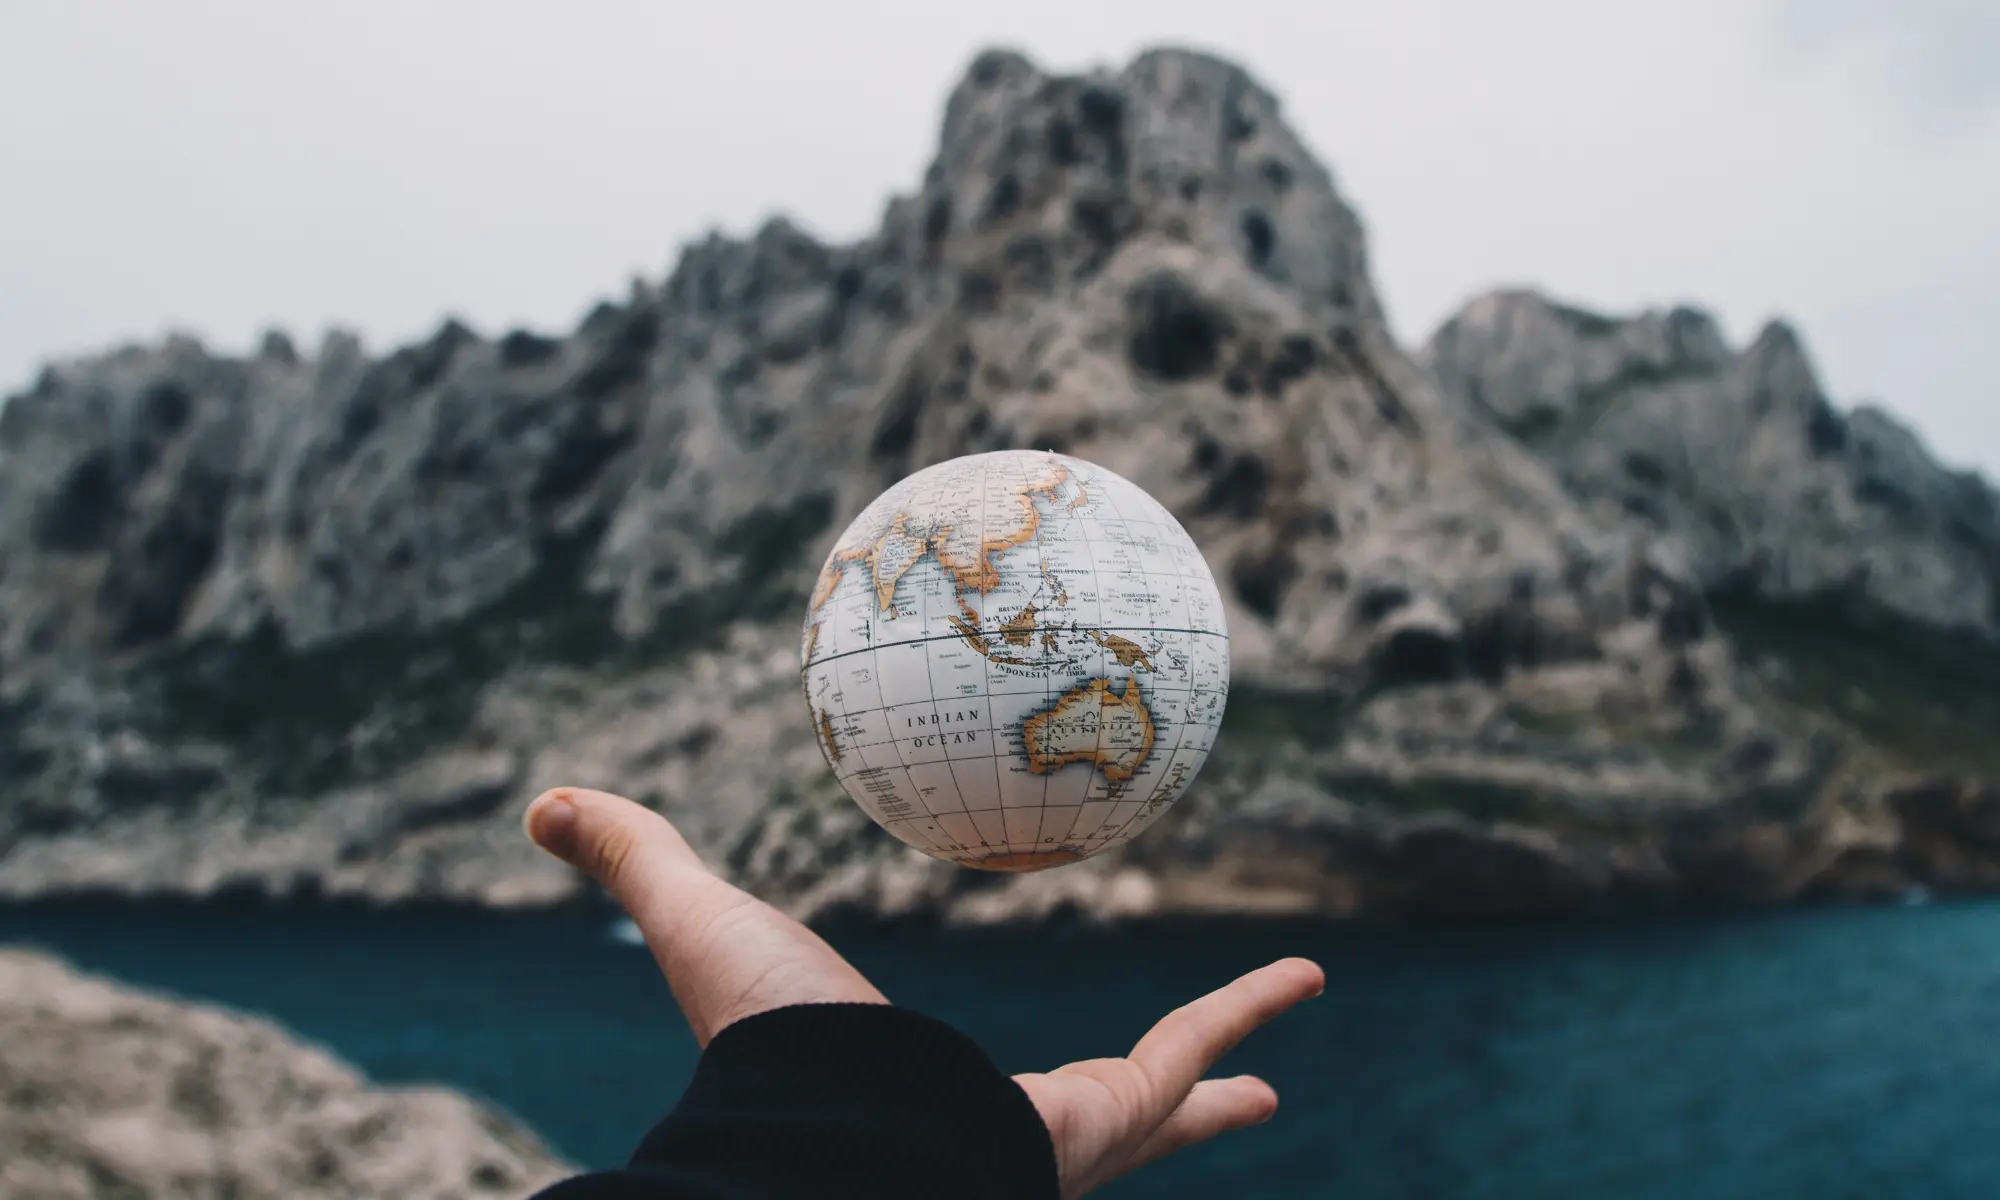 A person tossing a globe in the air with mountains and a lake in the background.